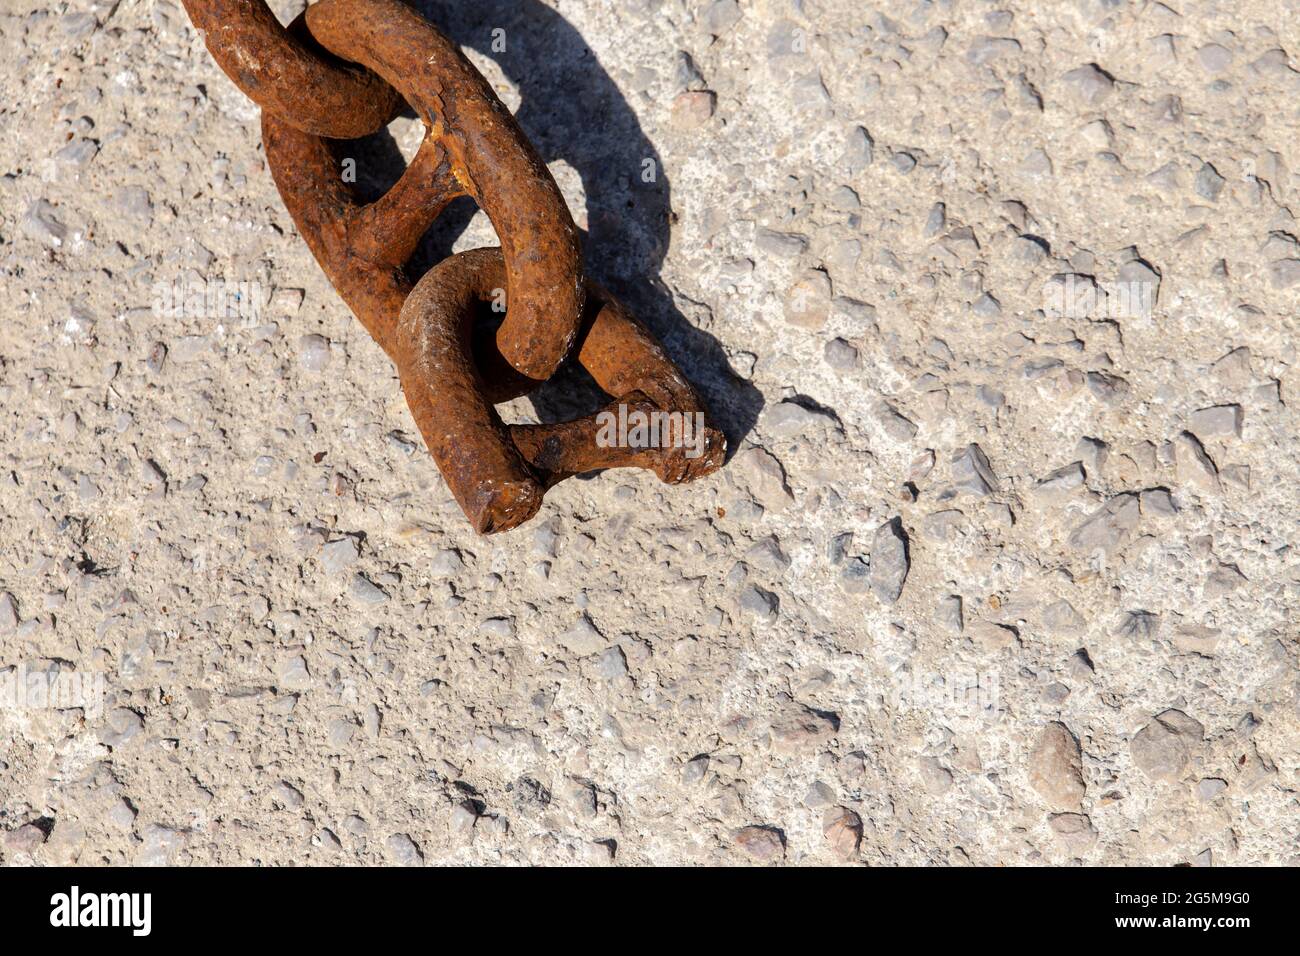 Strong iron mooring chain broken in half, lying on concrete under mid day sun, with copy space. Stock Photo